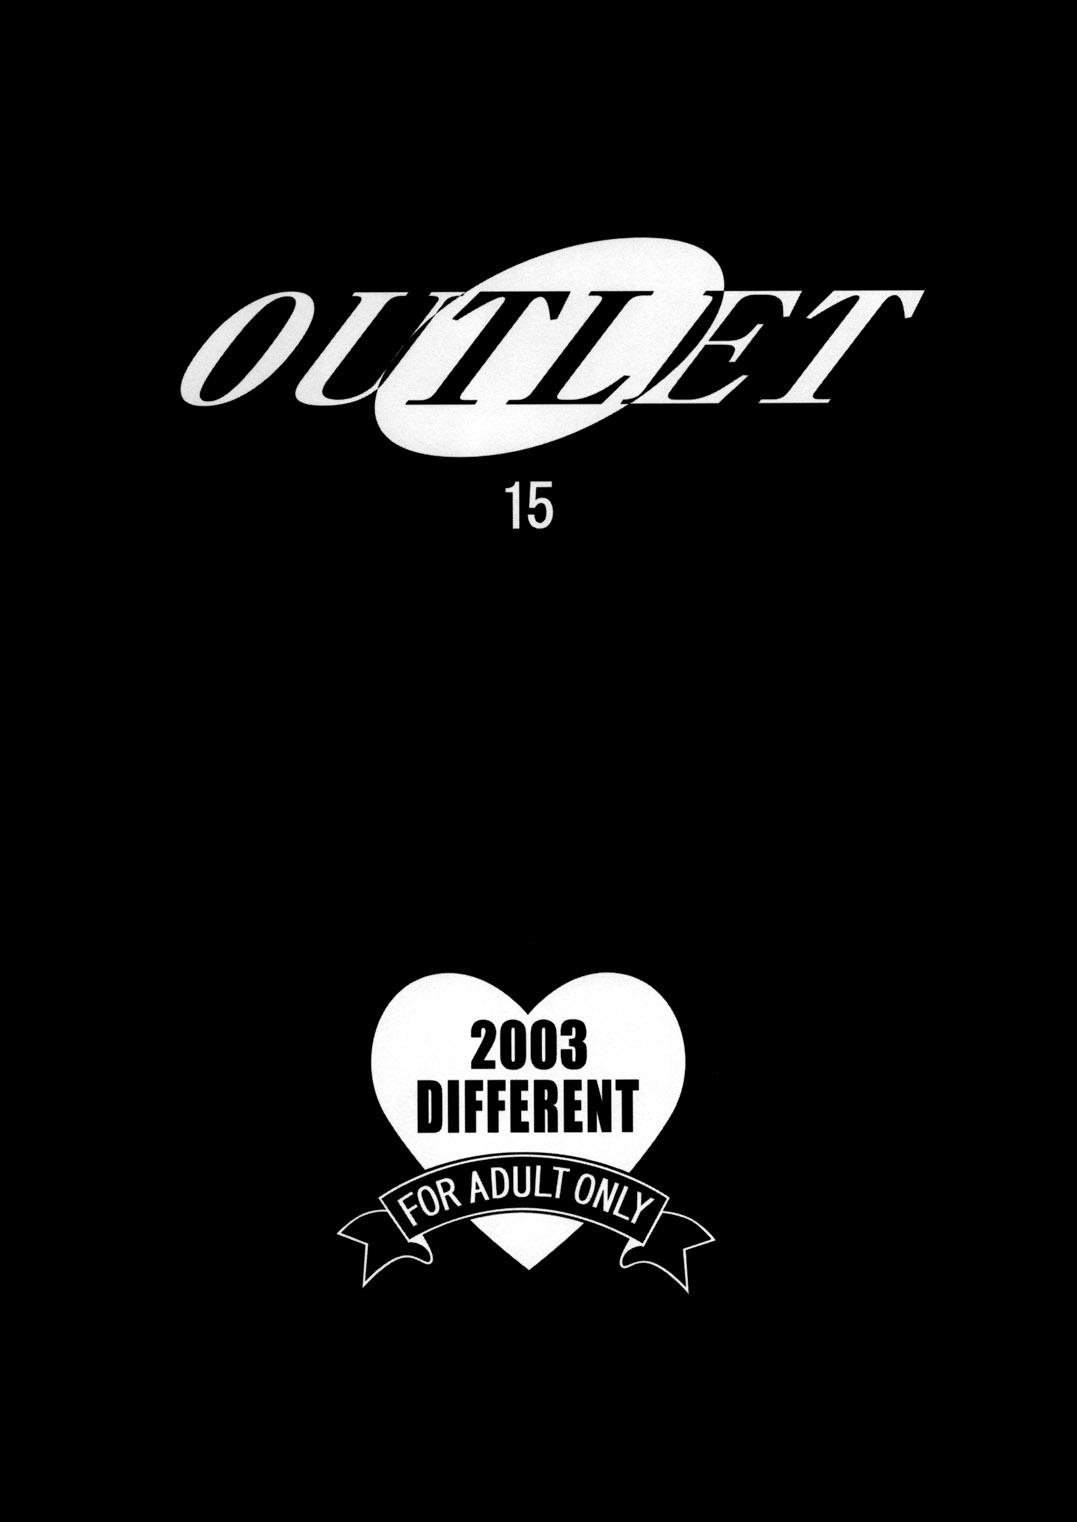 OUTLET 15 55